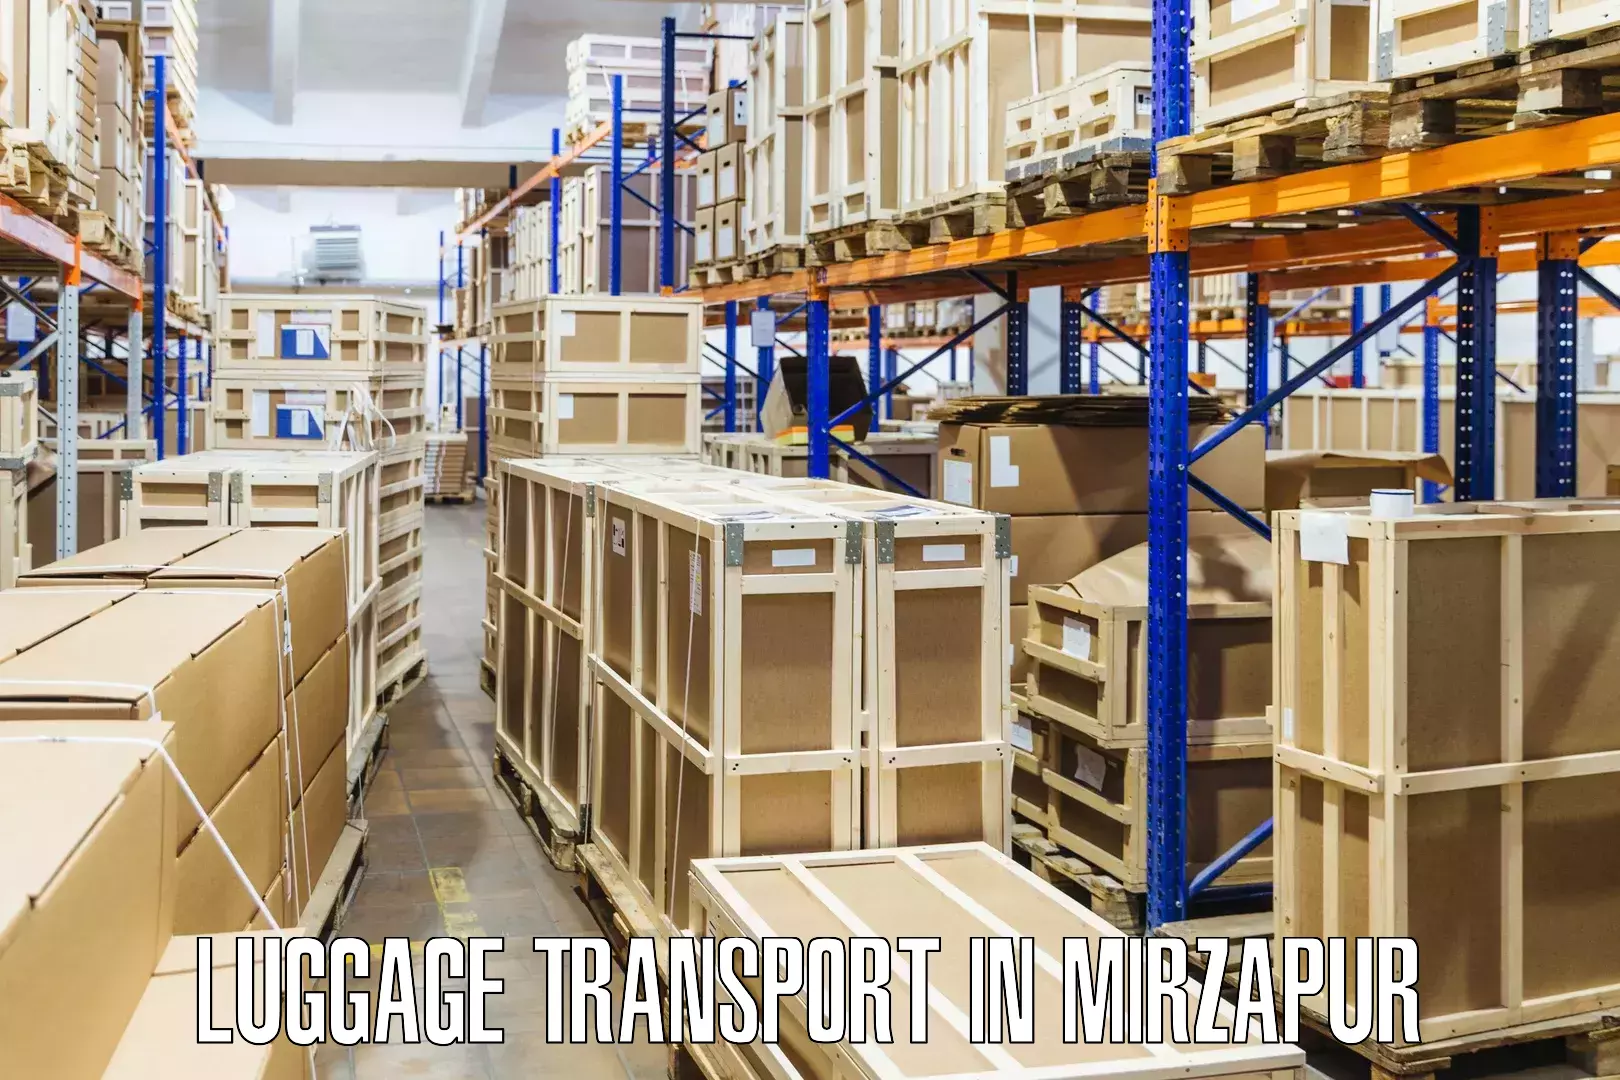 Luggage transport solutions in Mirzapur